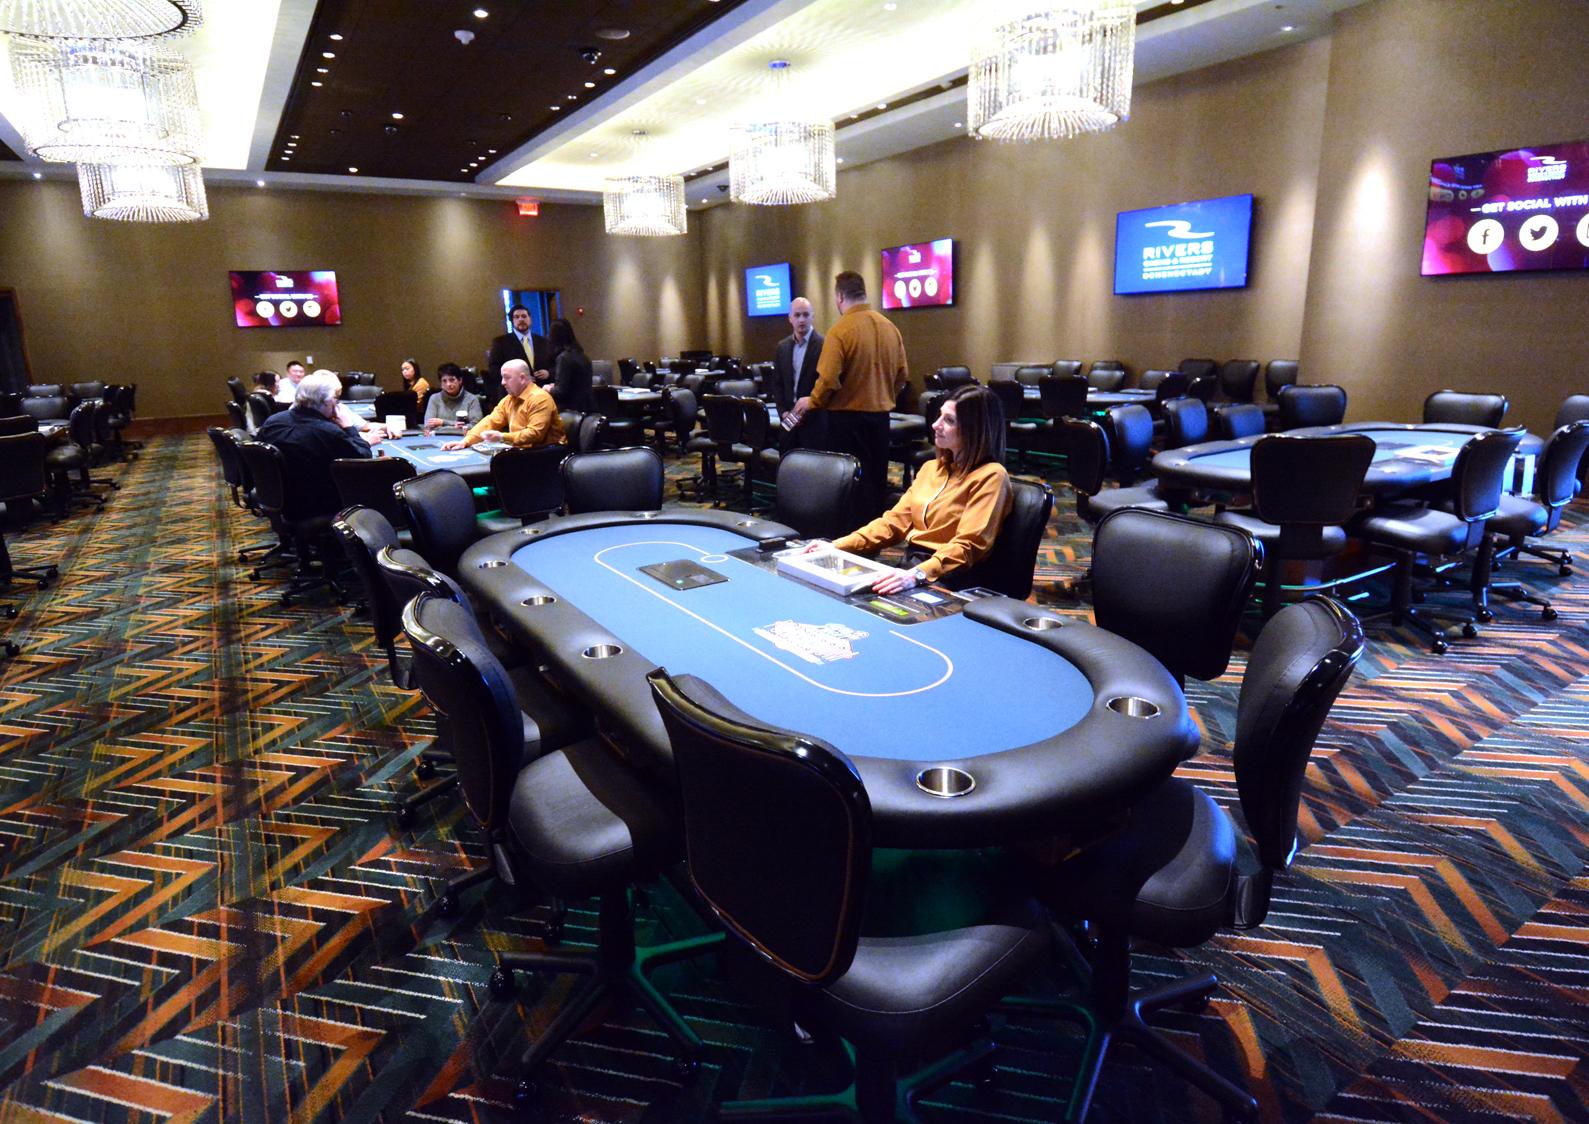 NY State’s Rivers Casino Poker Room Has Problem Most Would Envy: Too Much Business